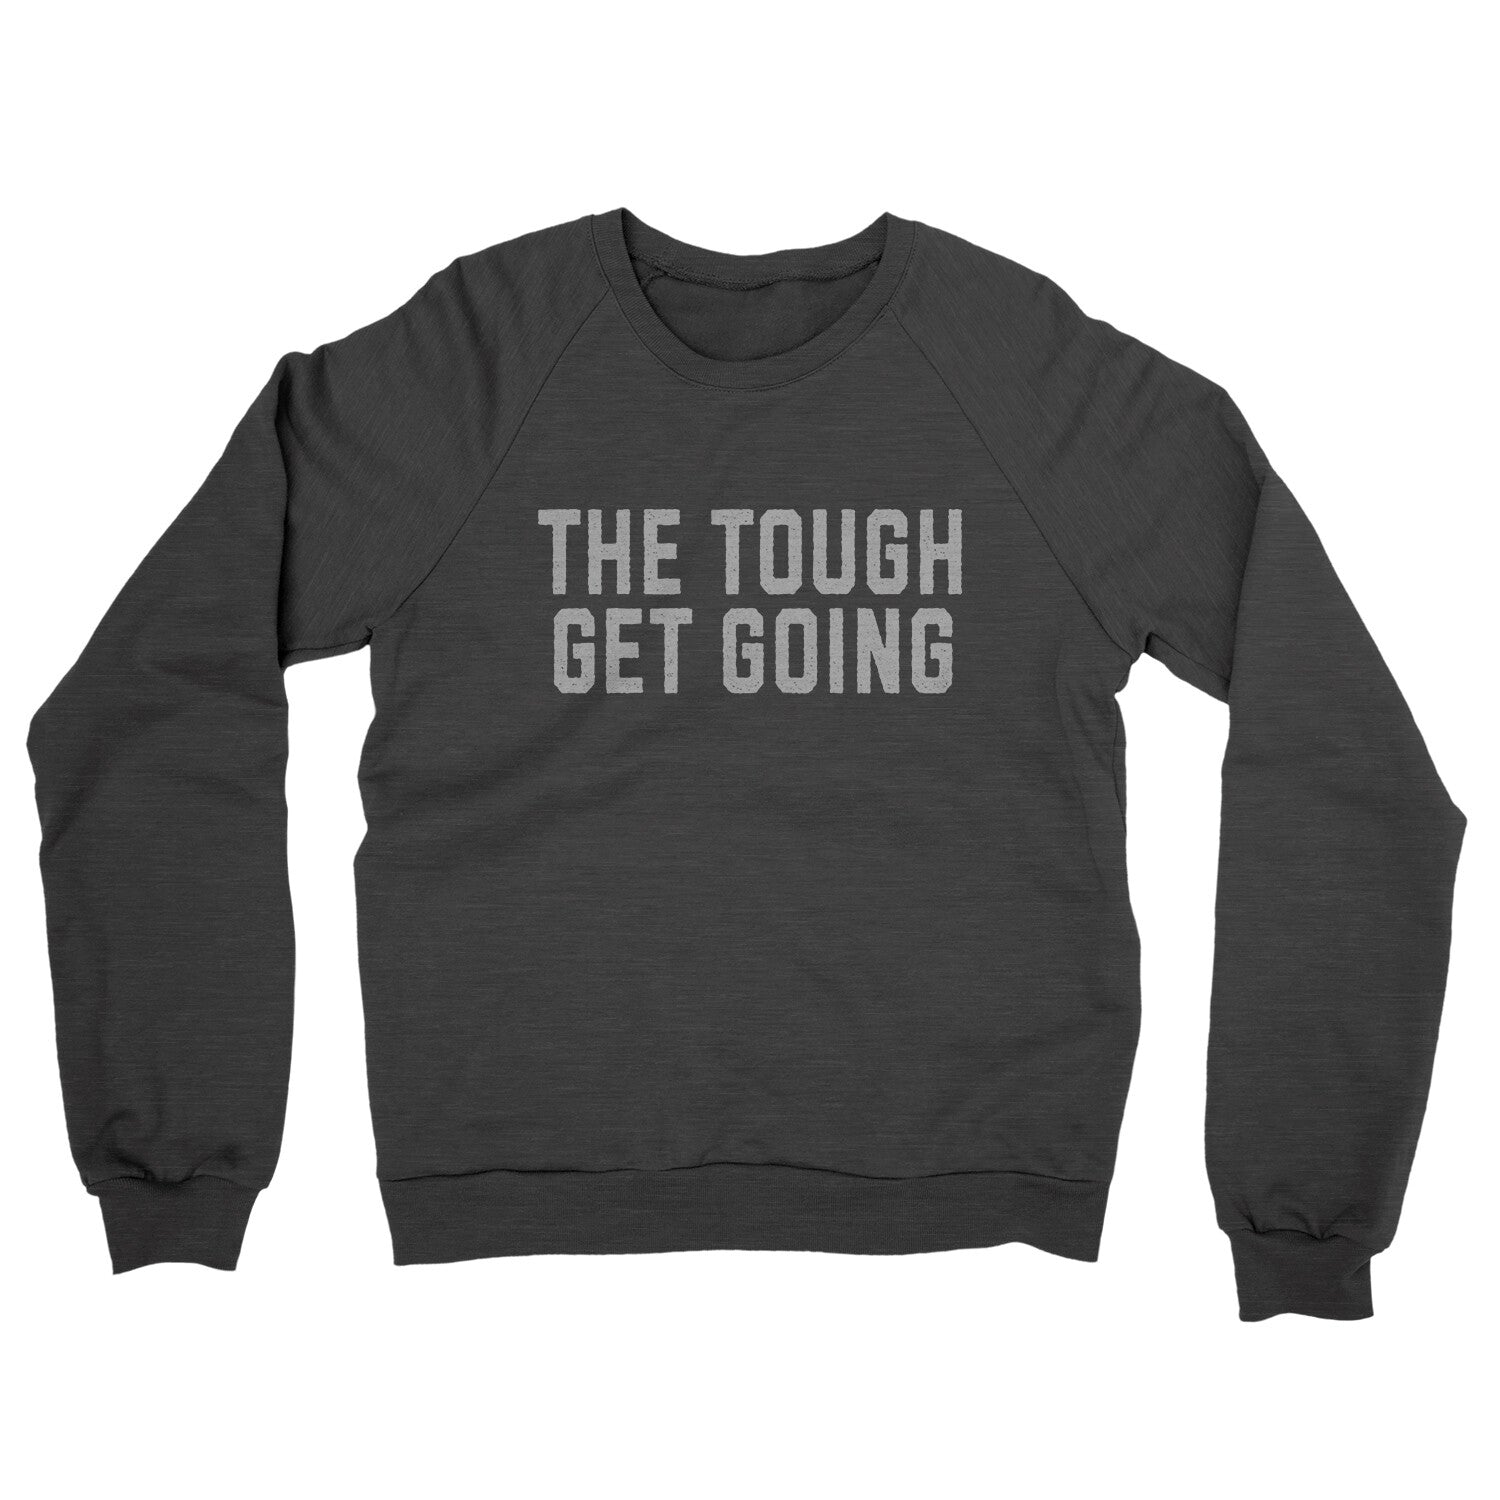 The Tough Get Going in Charcoal Heather Color